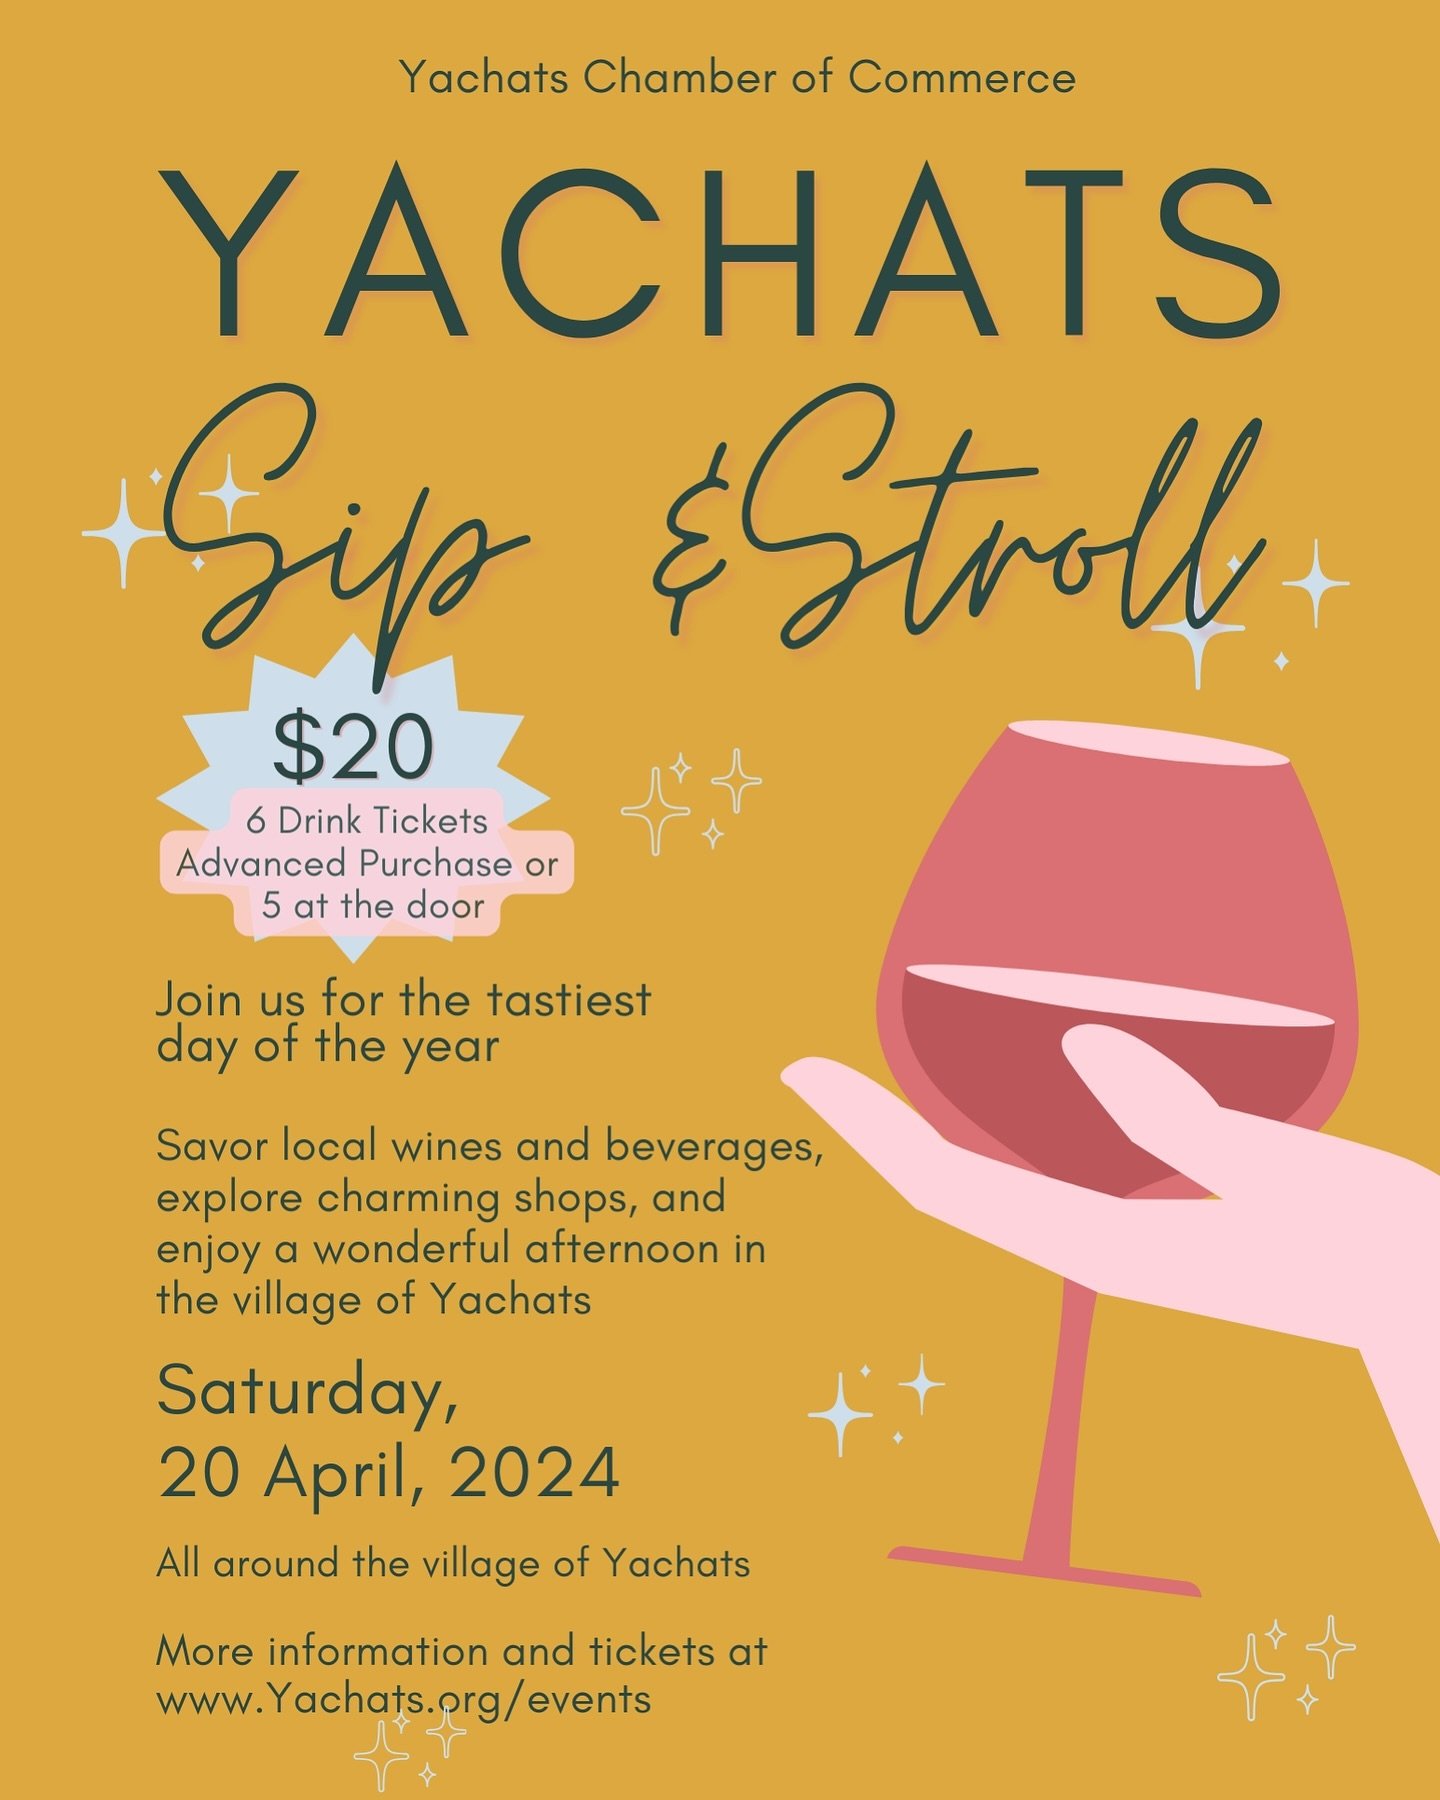 Sip and Stroll is two days away!! Do you have your tickets yet??? 

🎟️www.yachats.org/events/sip-and-stroll

Can&rsquo;t wait to see you there!!